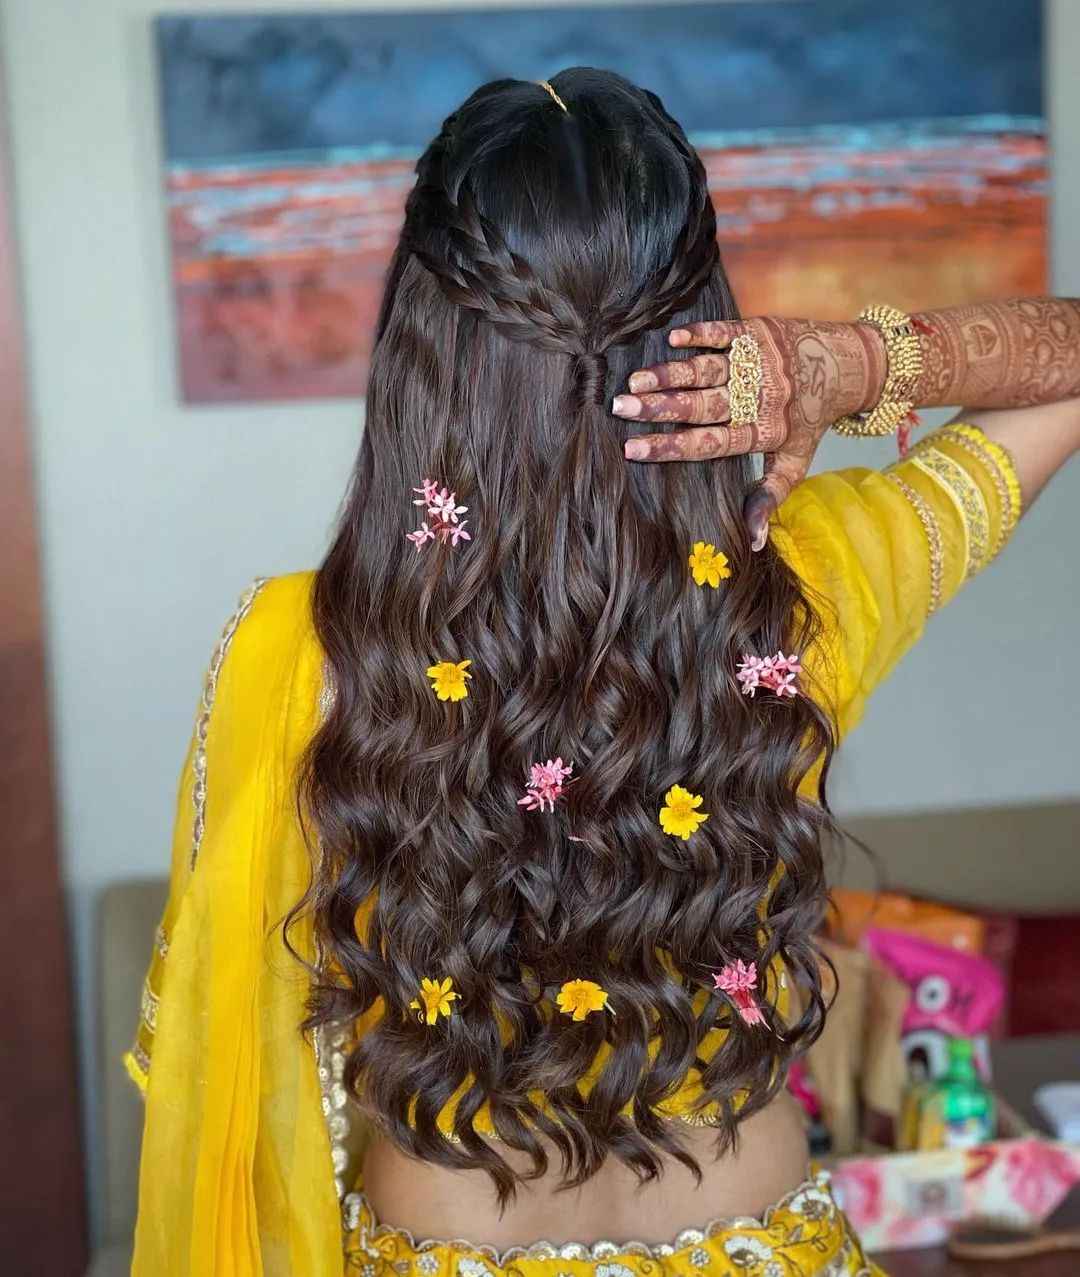 South Indian Wedding Hairstyles for Long Hair